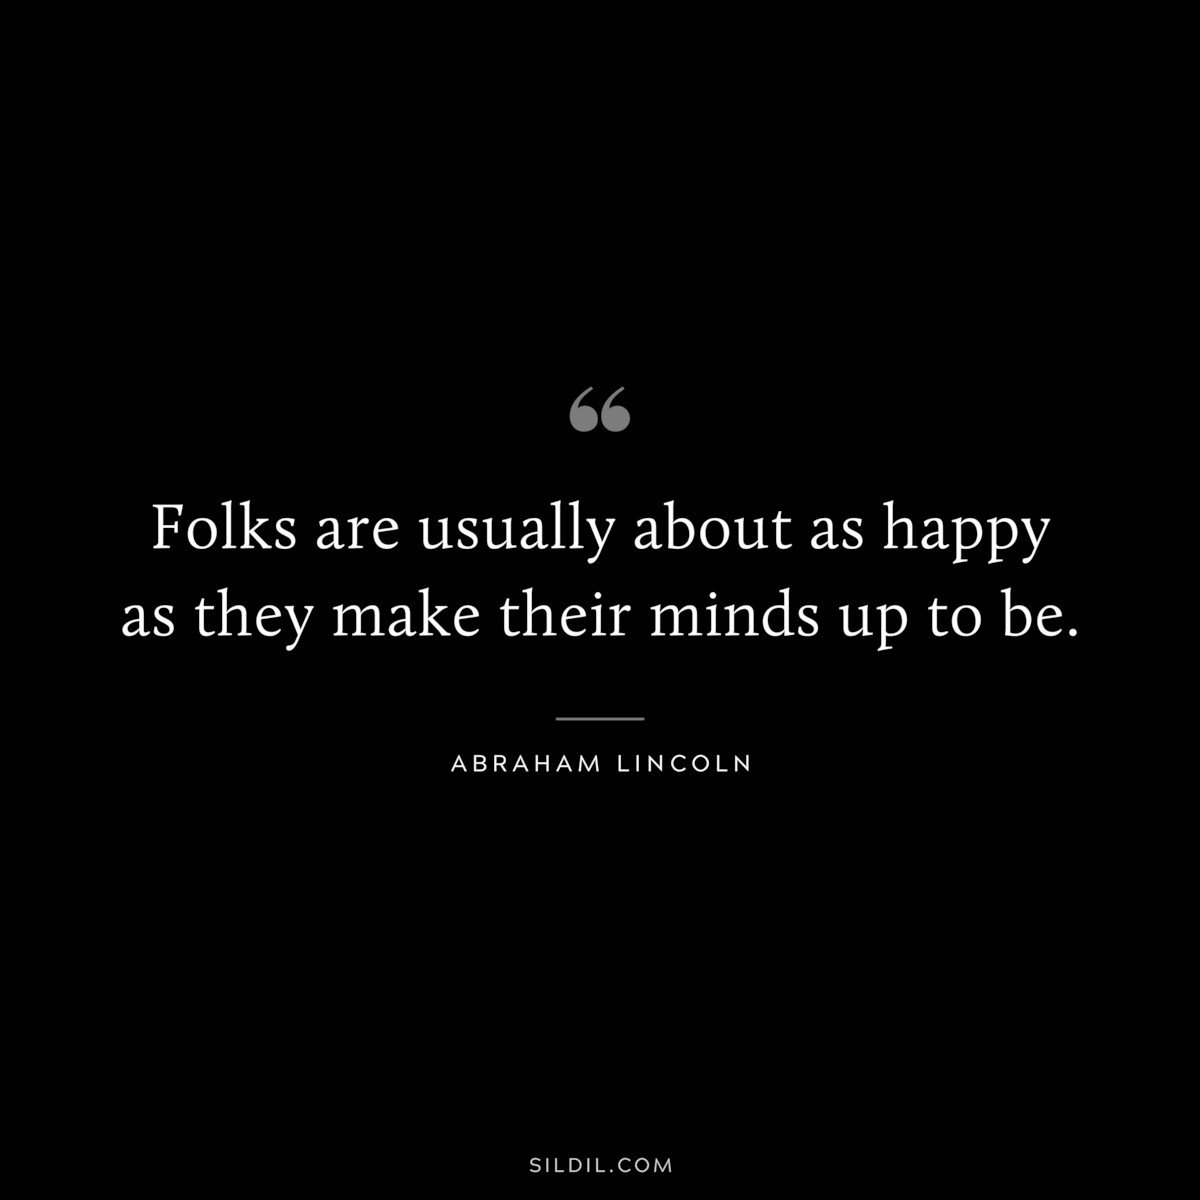 Folks are usually about as happy as they make their minds up to be. ― Abraham Lincoln